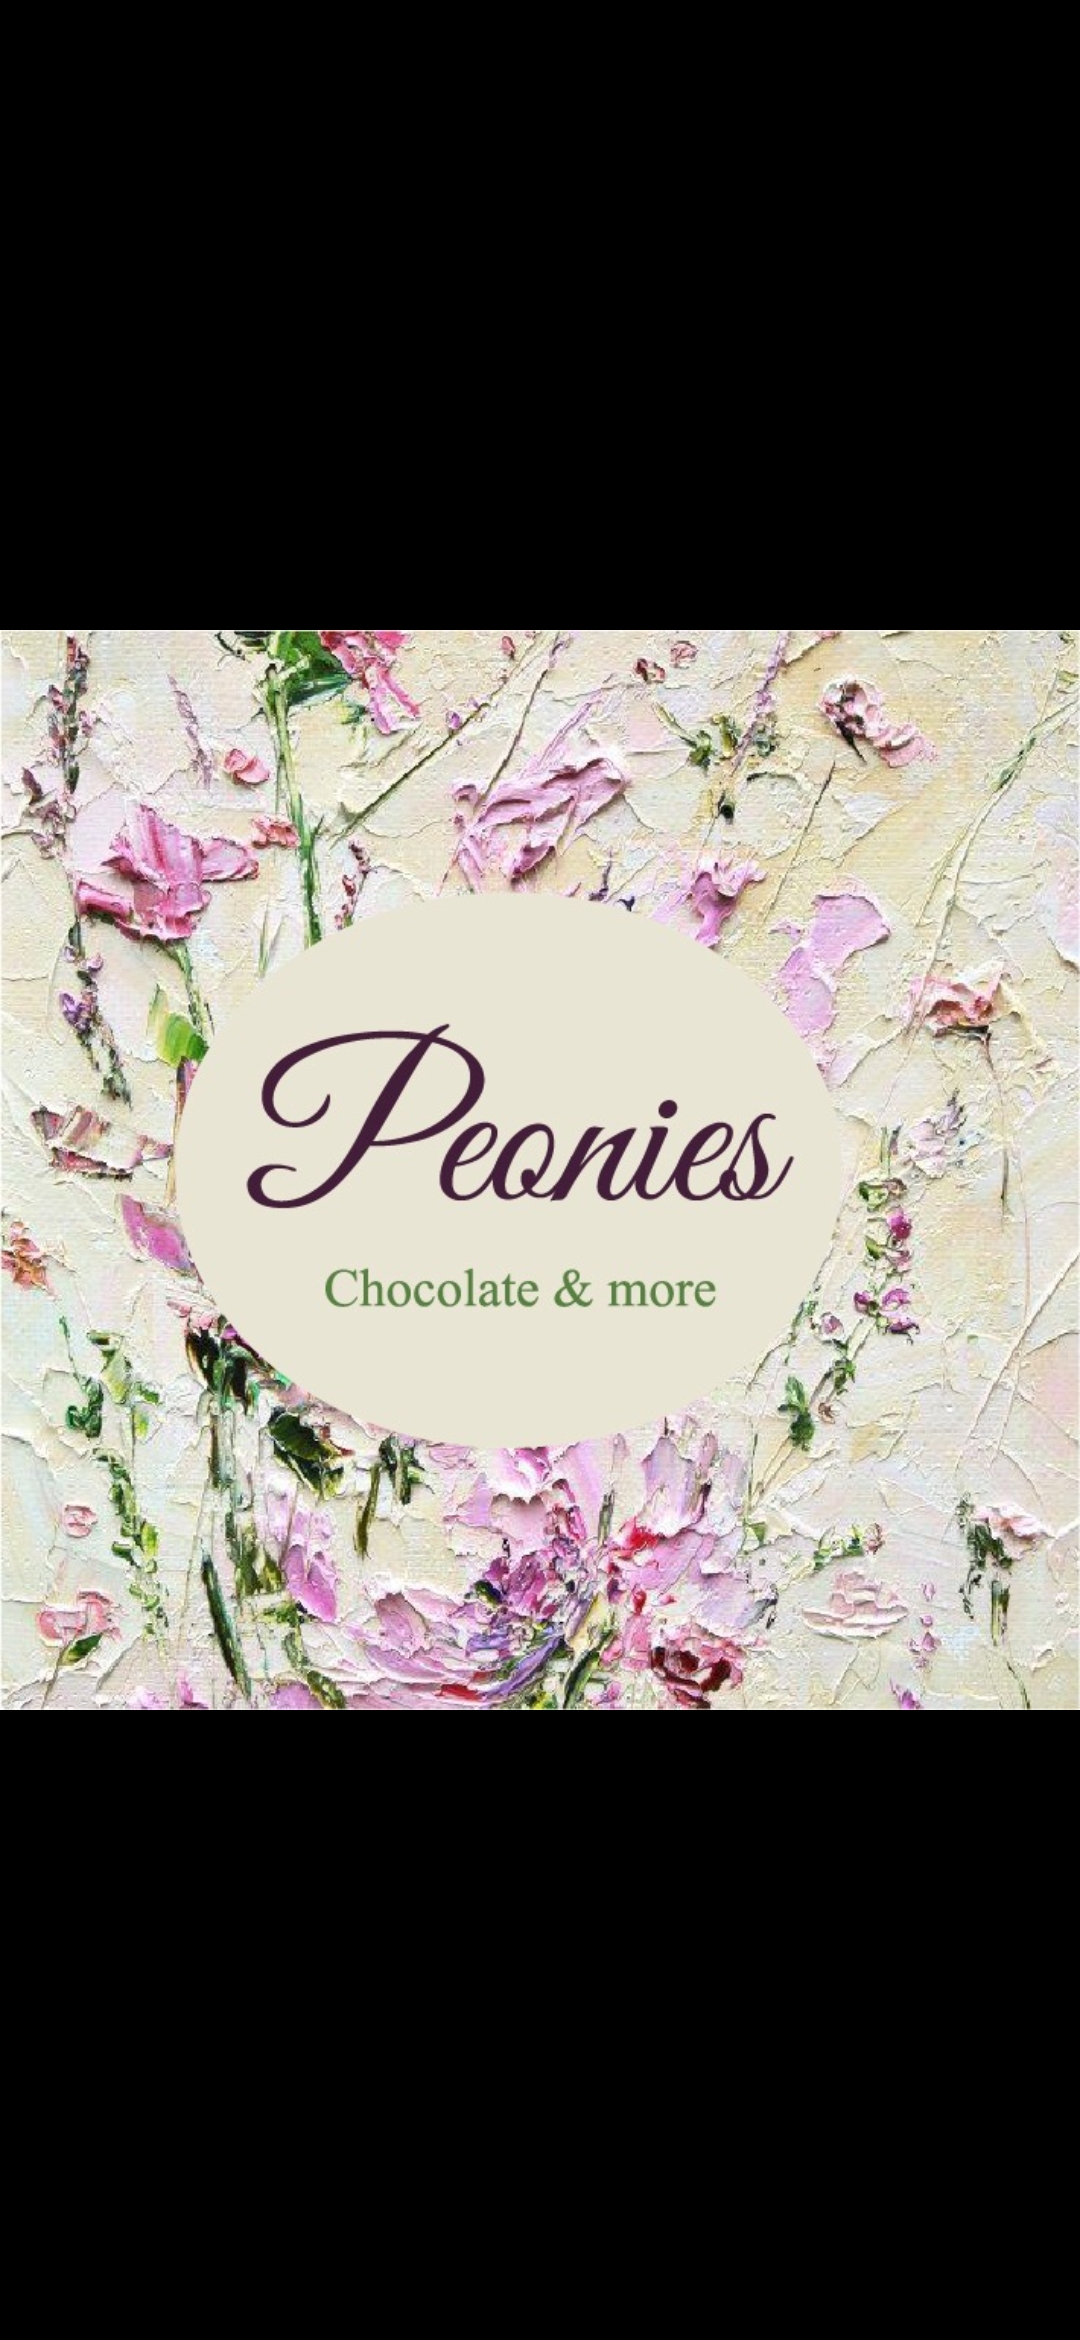 Peonies Chocolate and More